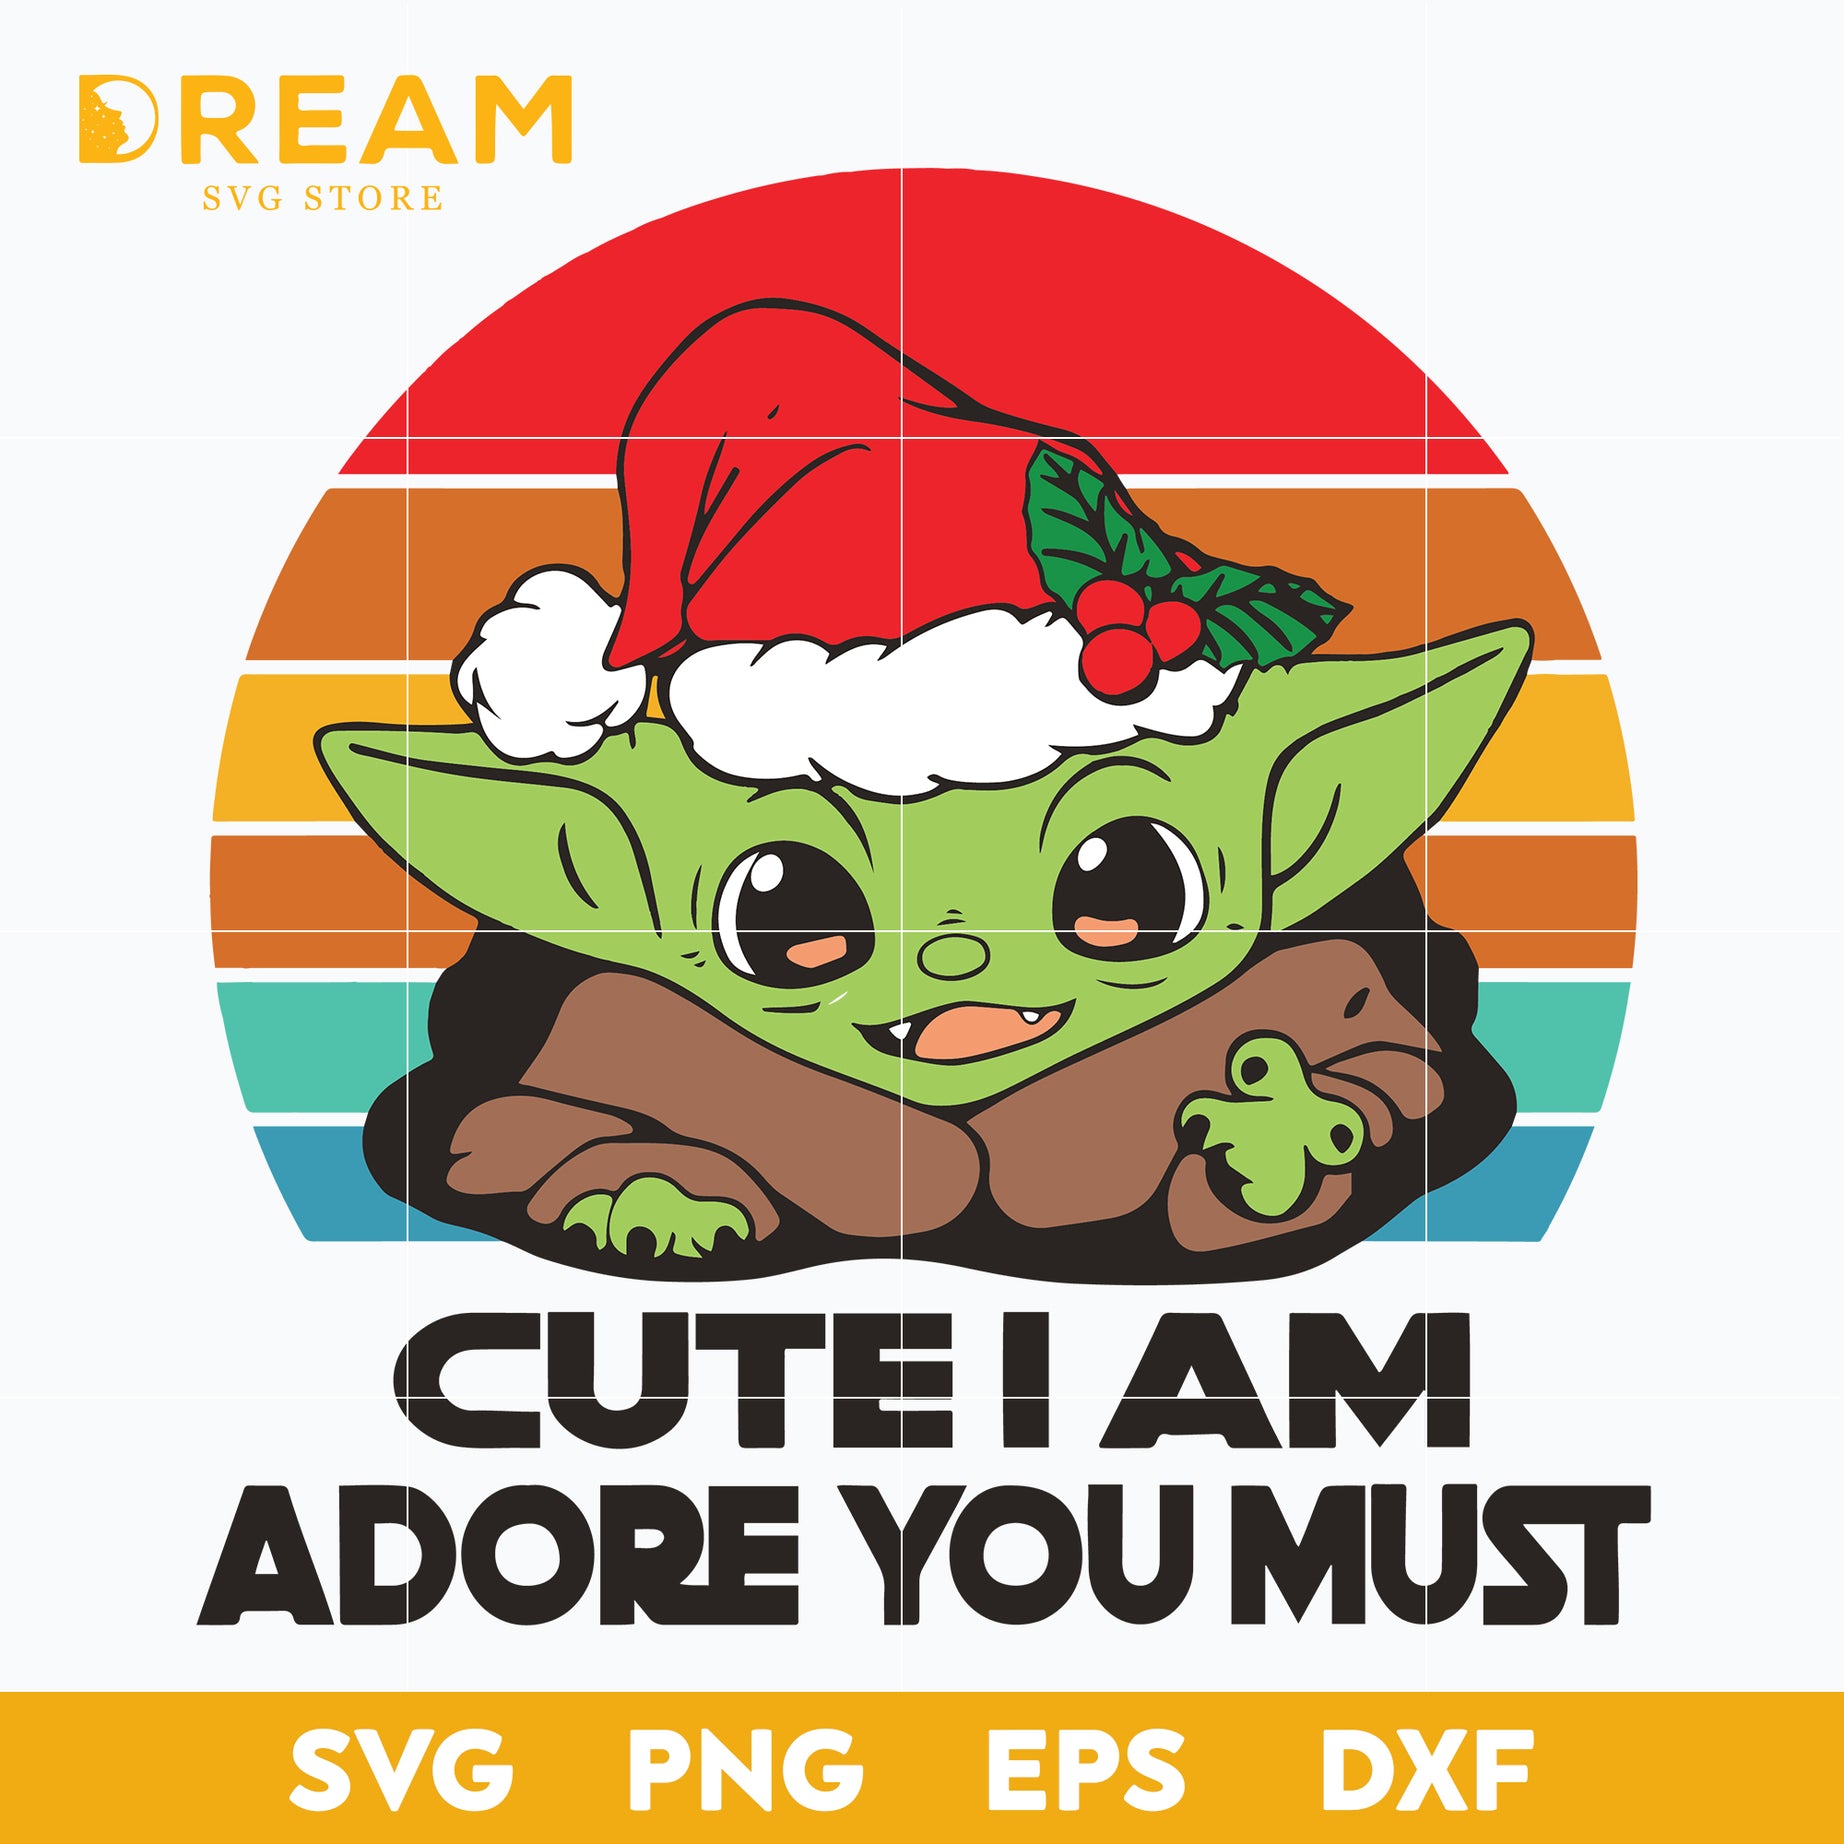 Cute i am adore you must svg, baby yoda christmas svg, Christmas svg, png, dxf, eps digital file CRM14122017L